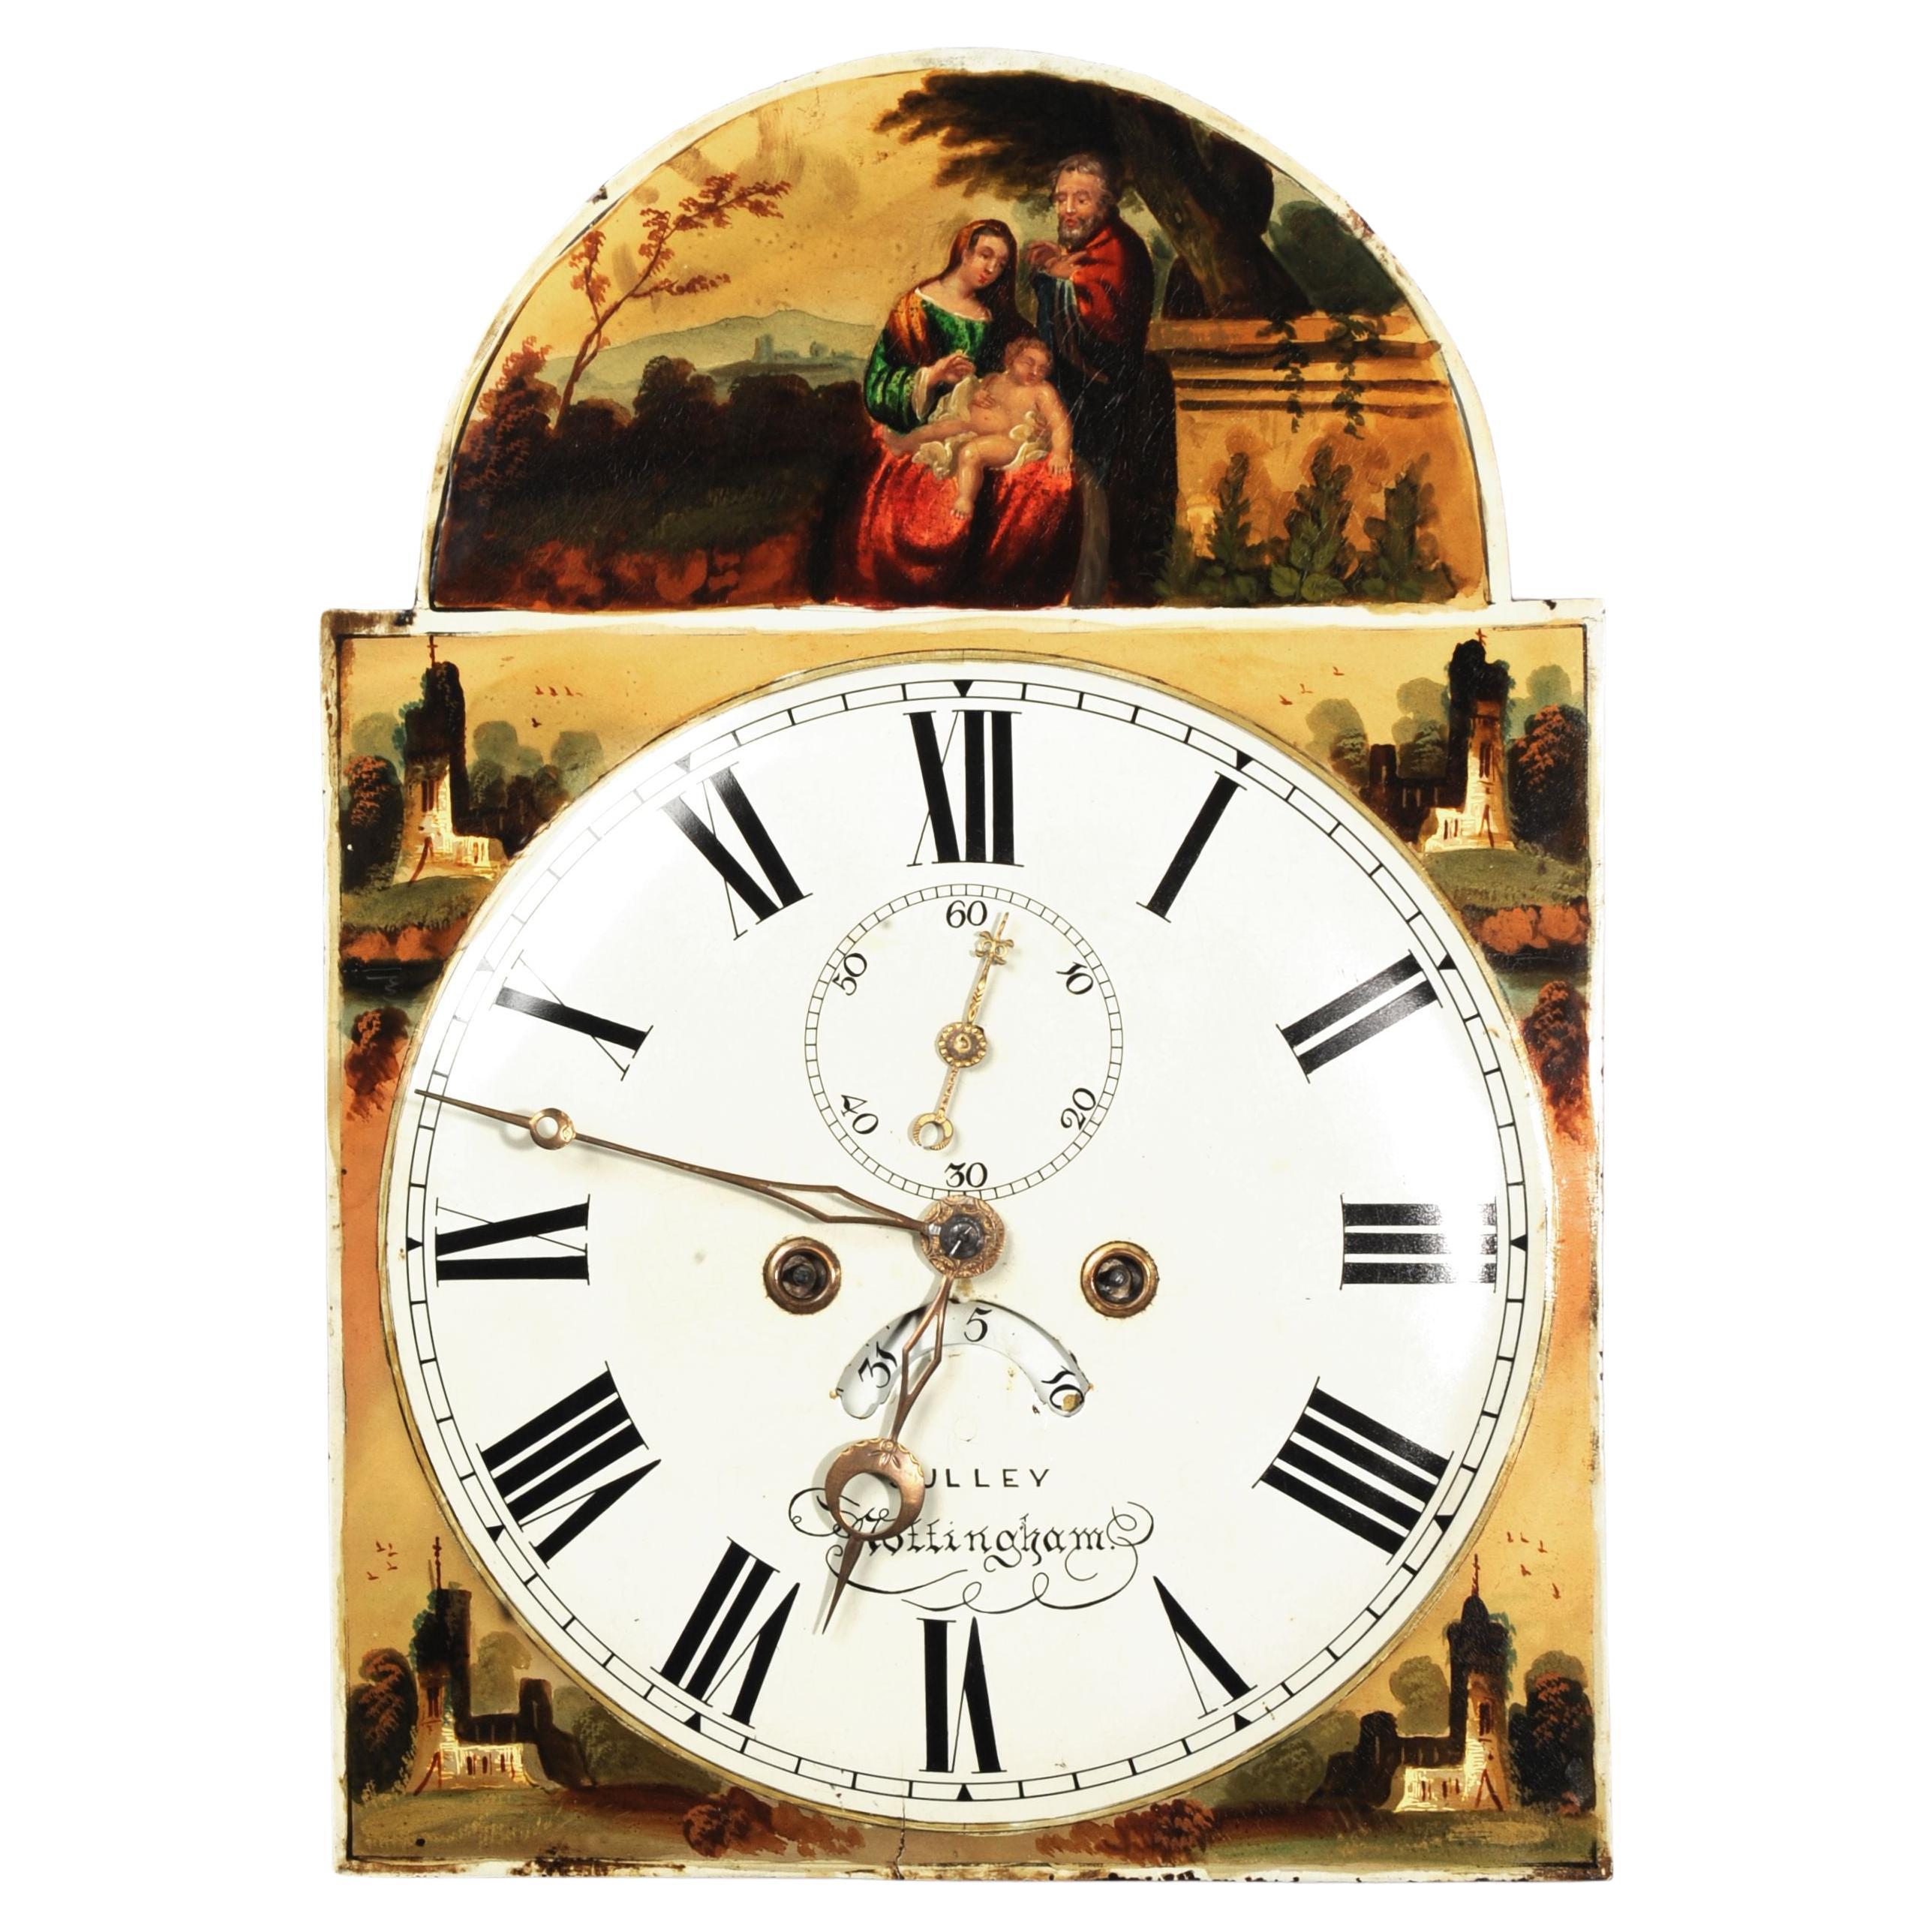 Christmas Antique English Iron Clock Dial Face - Rare Holy Family Dial - Working For Sale